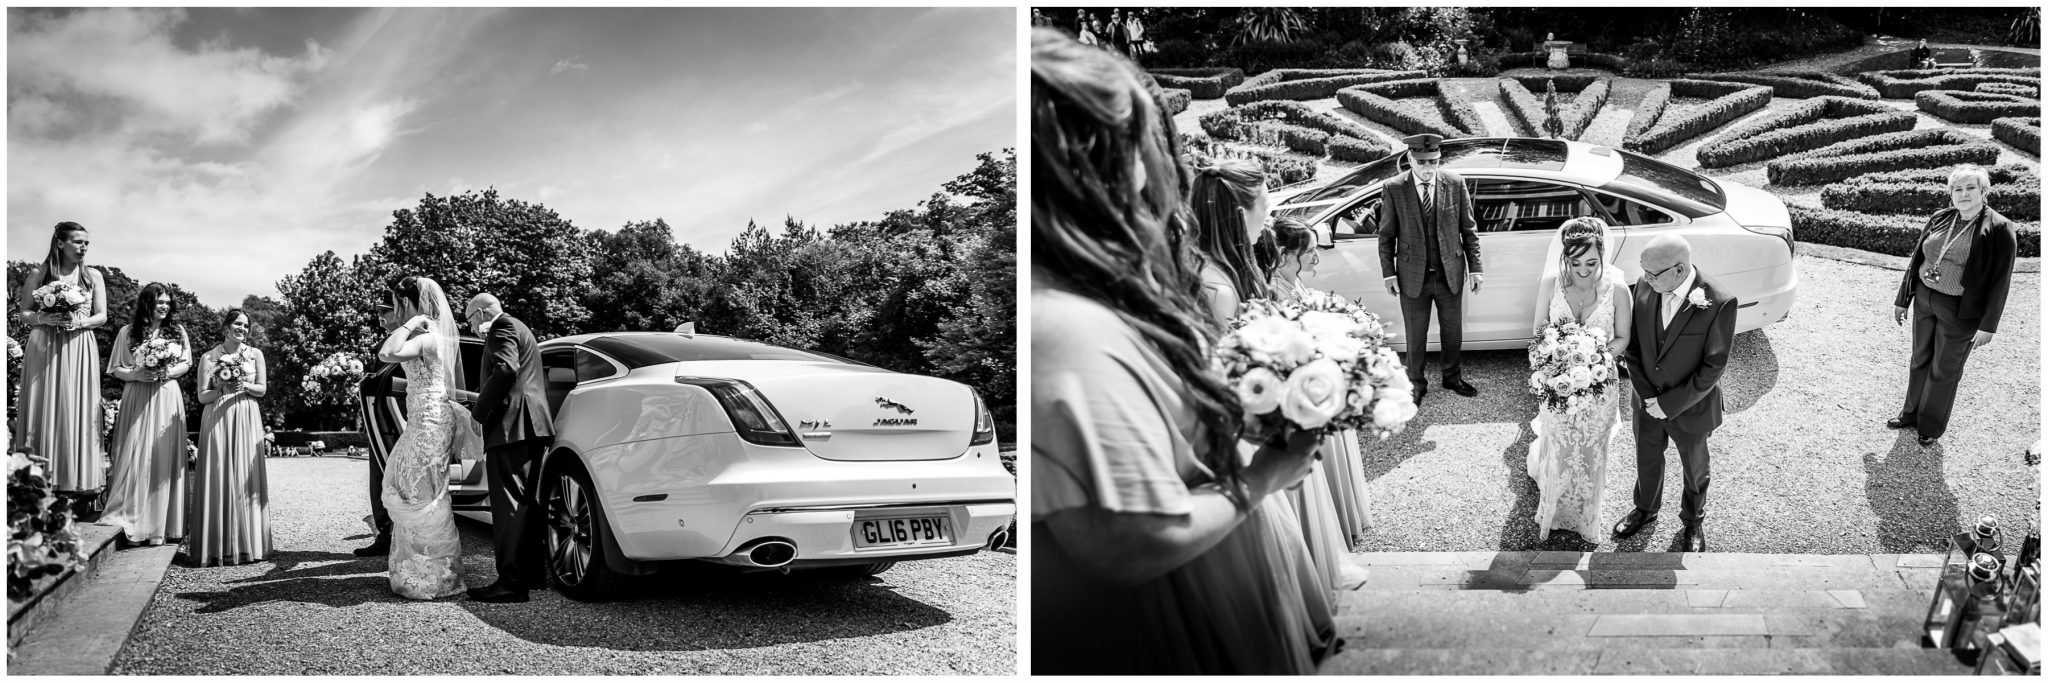 Bride steps out of the wedding car black and white documentary wedding photography